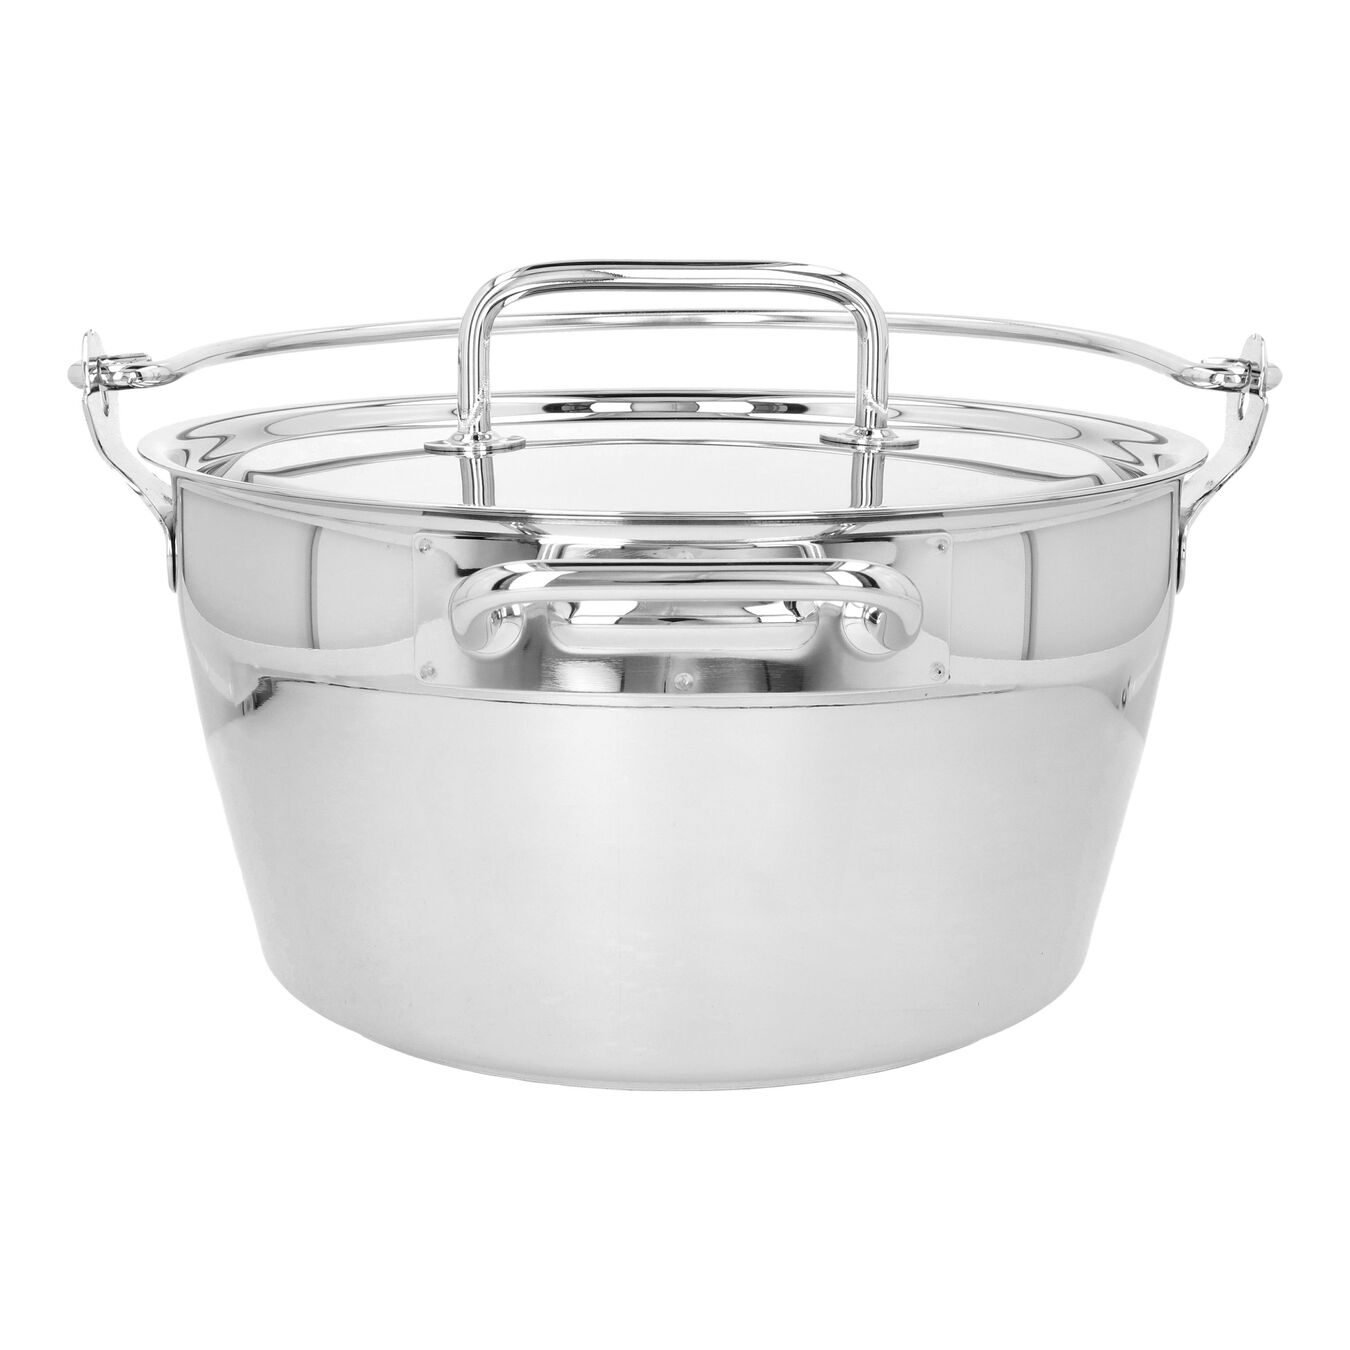 10.6 qt, 18/10 Stainless Steel, Maslin Pan,,large 1